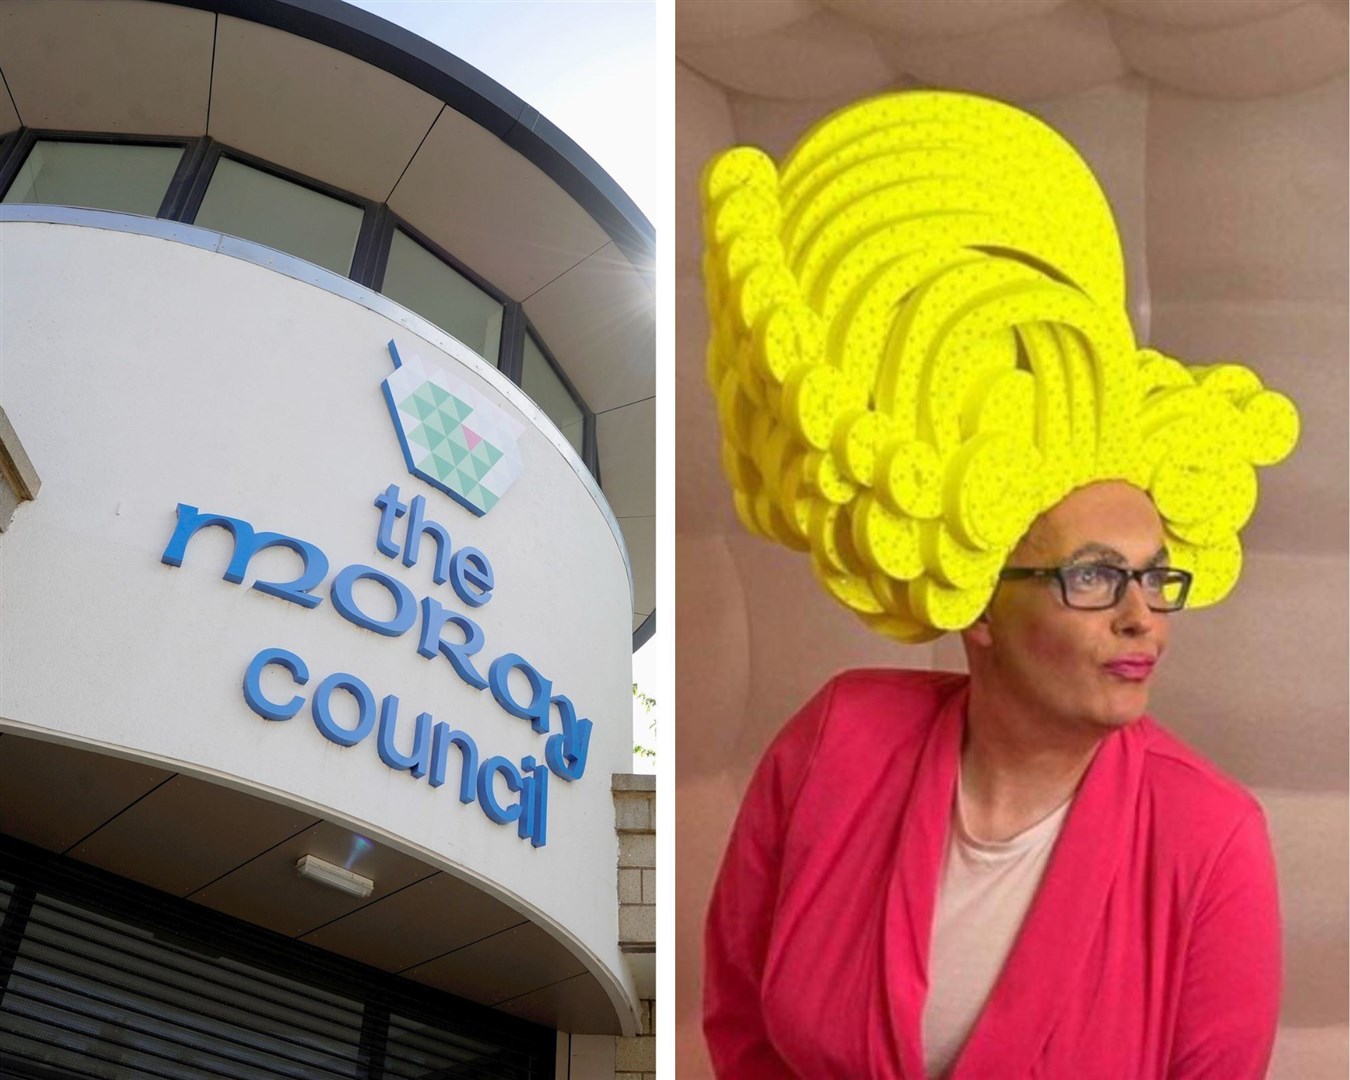 The council disabled comments just hours after announcing that a drag queen known as 'Miss Lossie Mouth' would lead an interactive show for kids at Elgin Library this weekend.